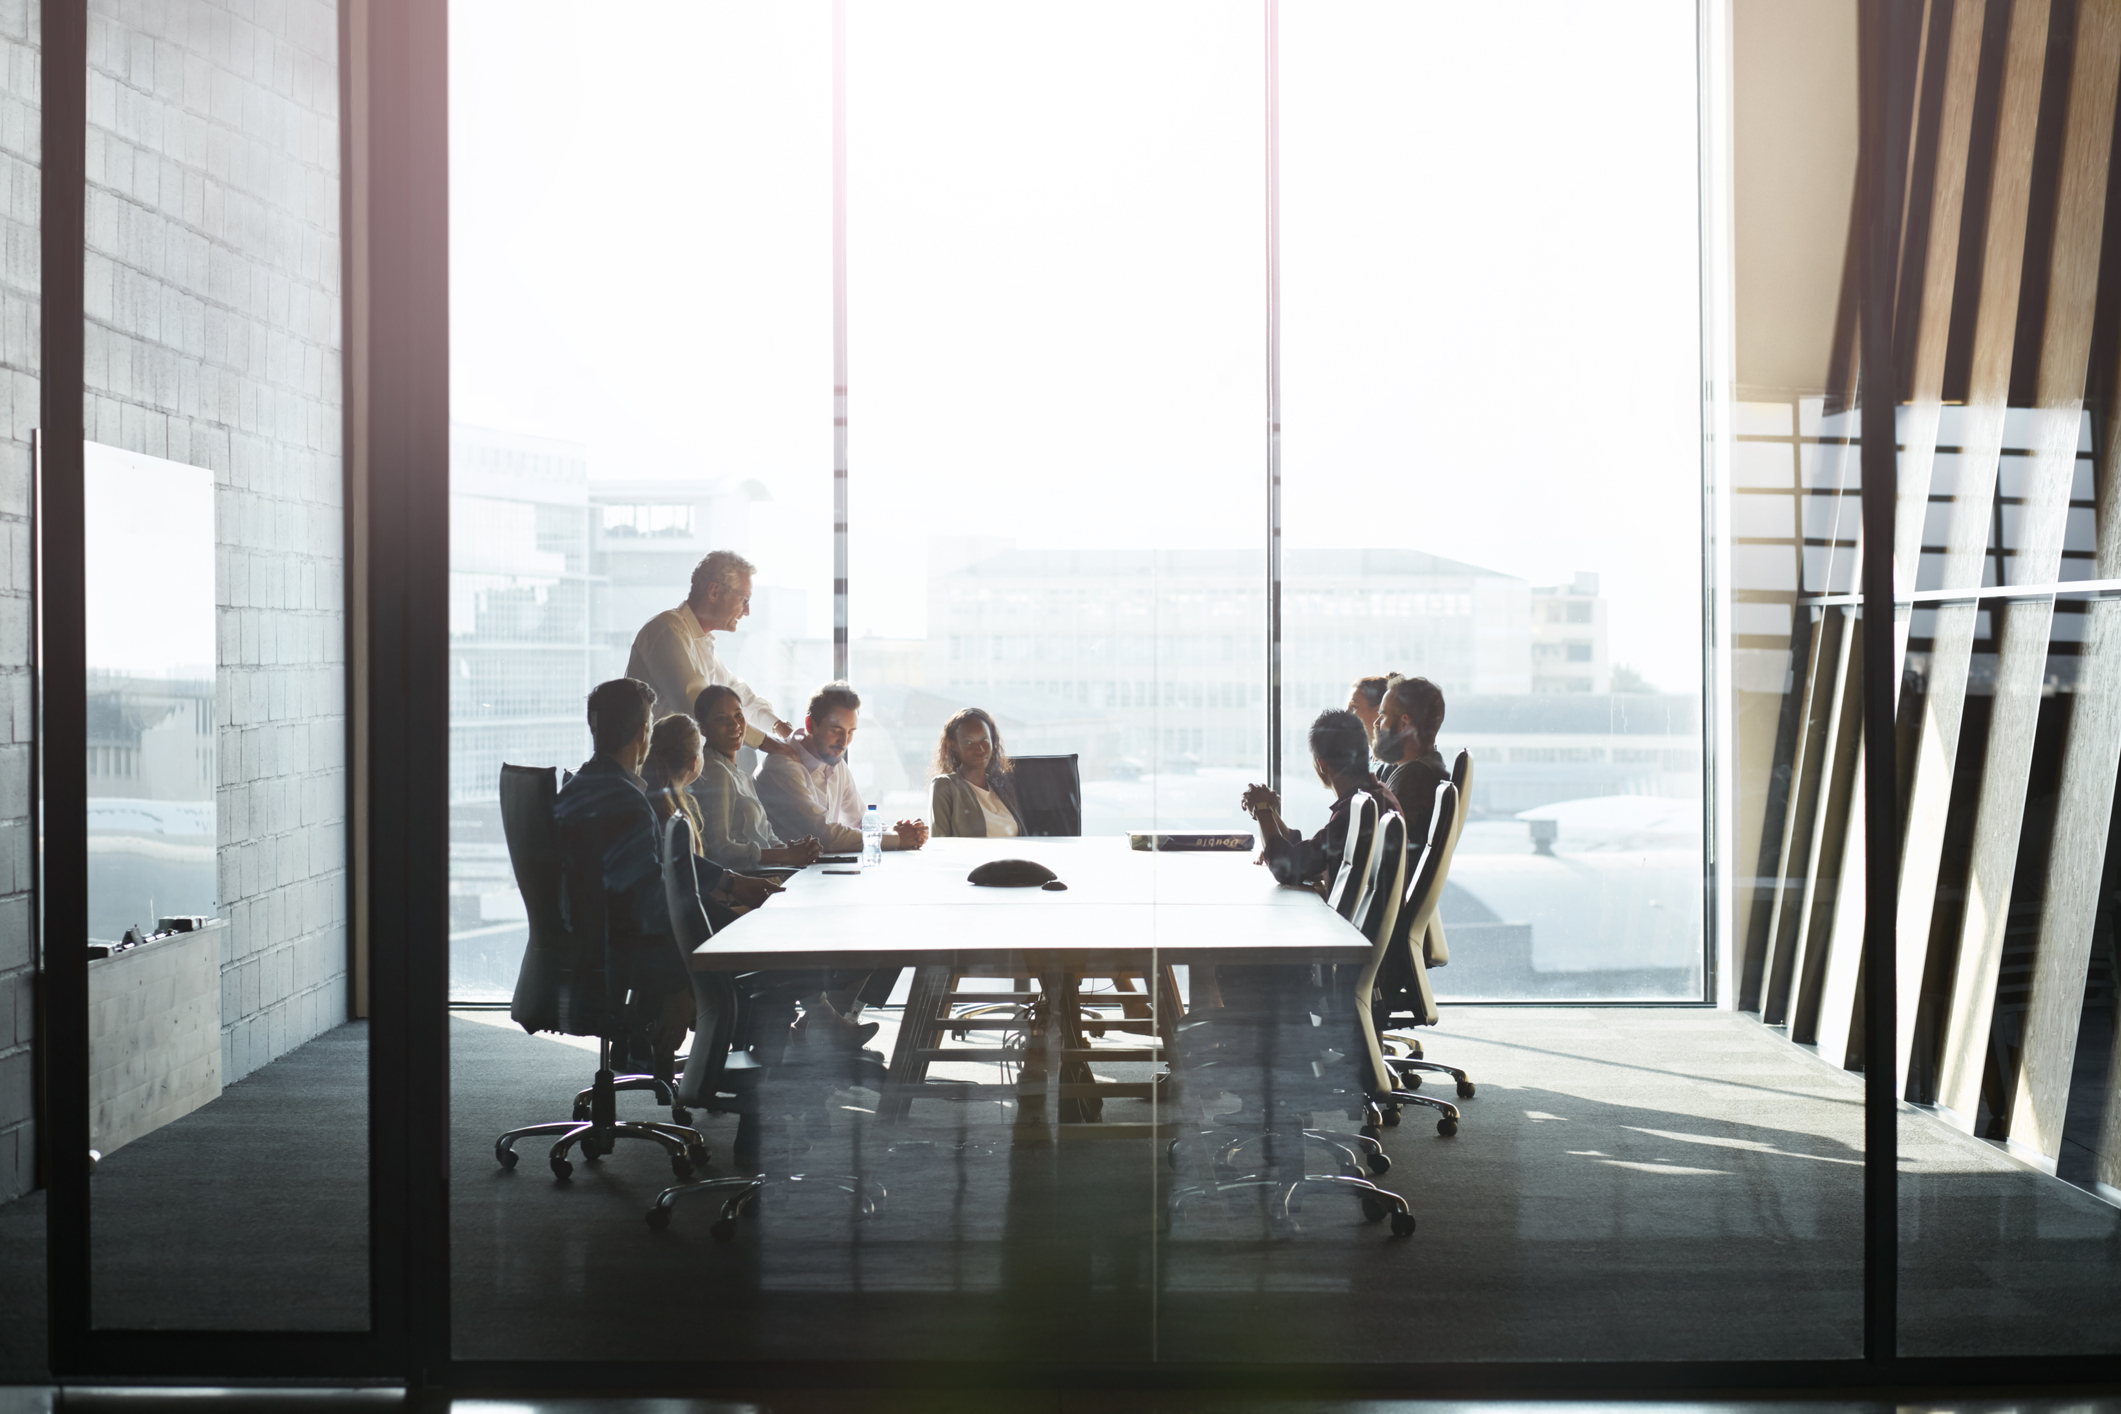 Business professionals in a meeting around a conference table in a bright, sunlit office with large windows.